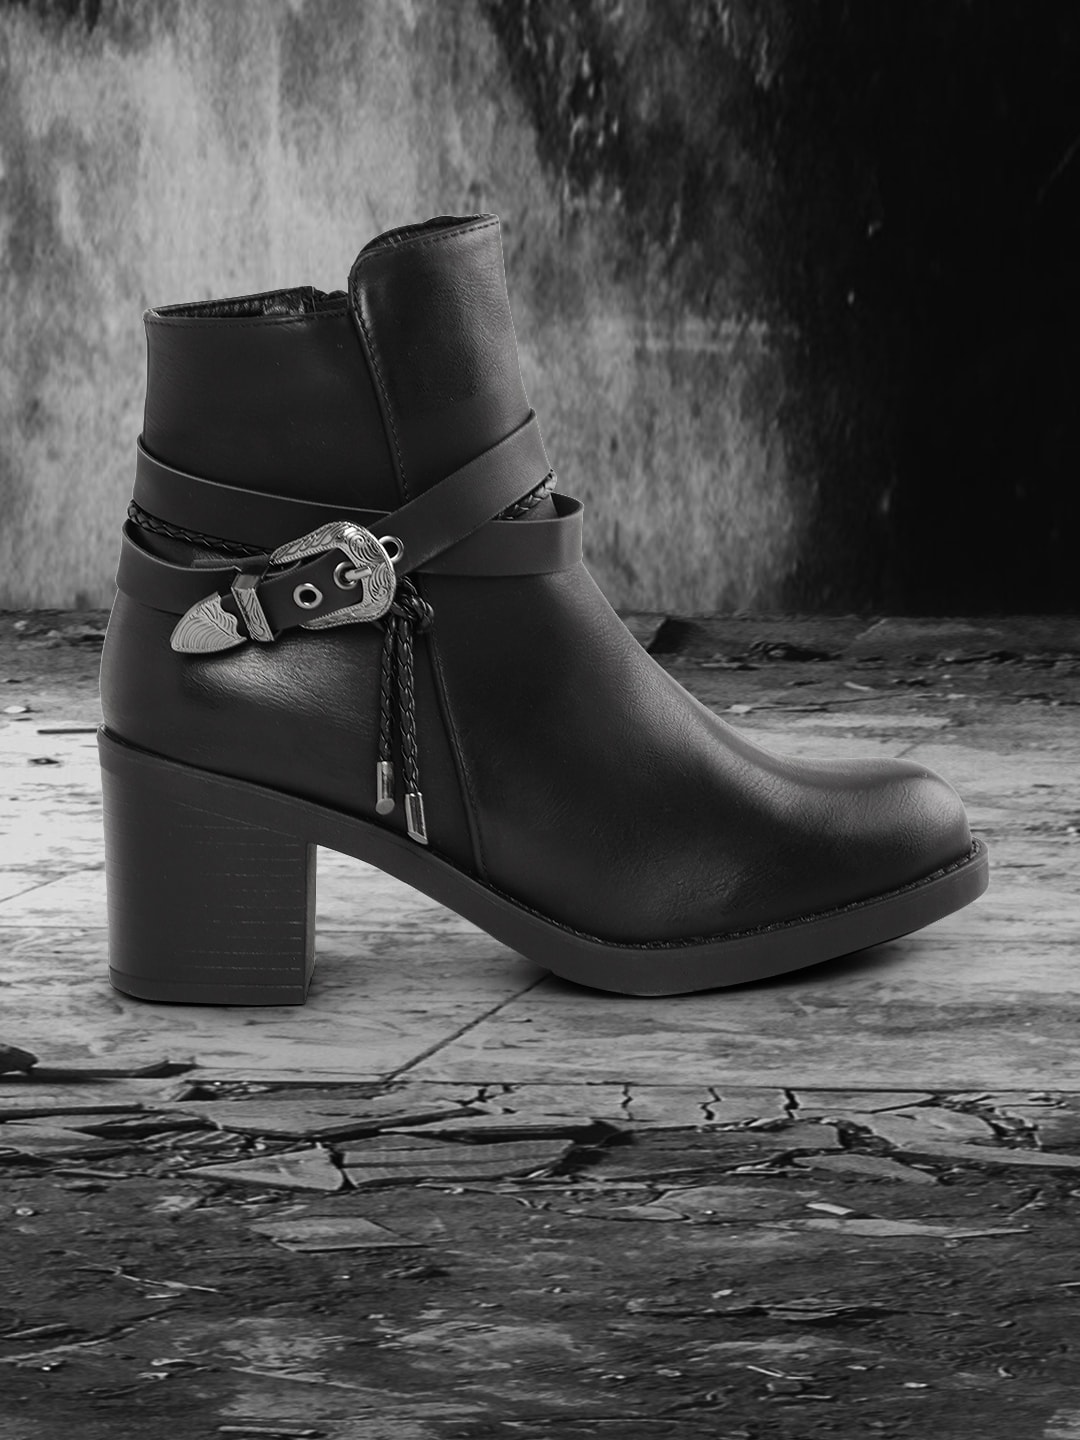 The Roadster Lifestyle Co Black Block Mid Top Heeled Boots with Buckles Price in India